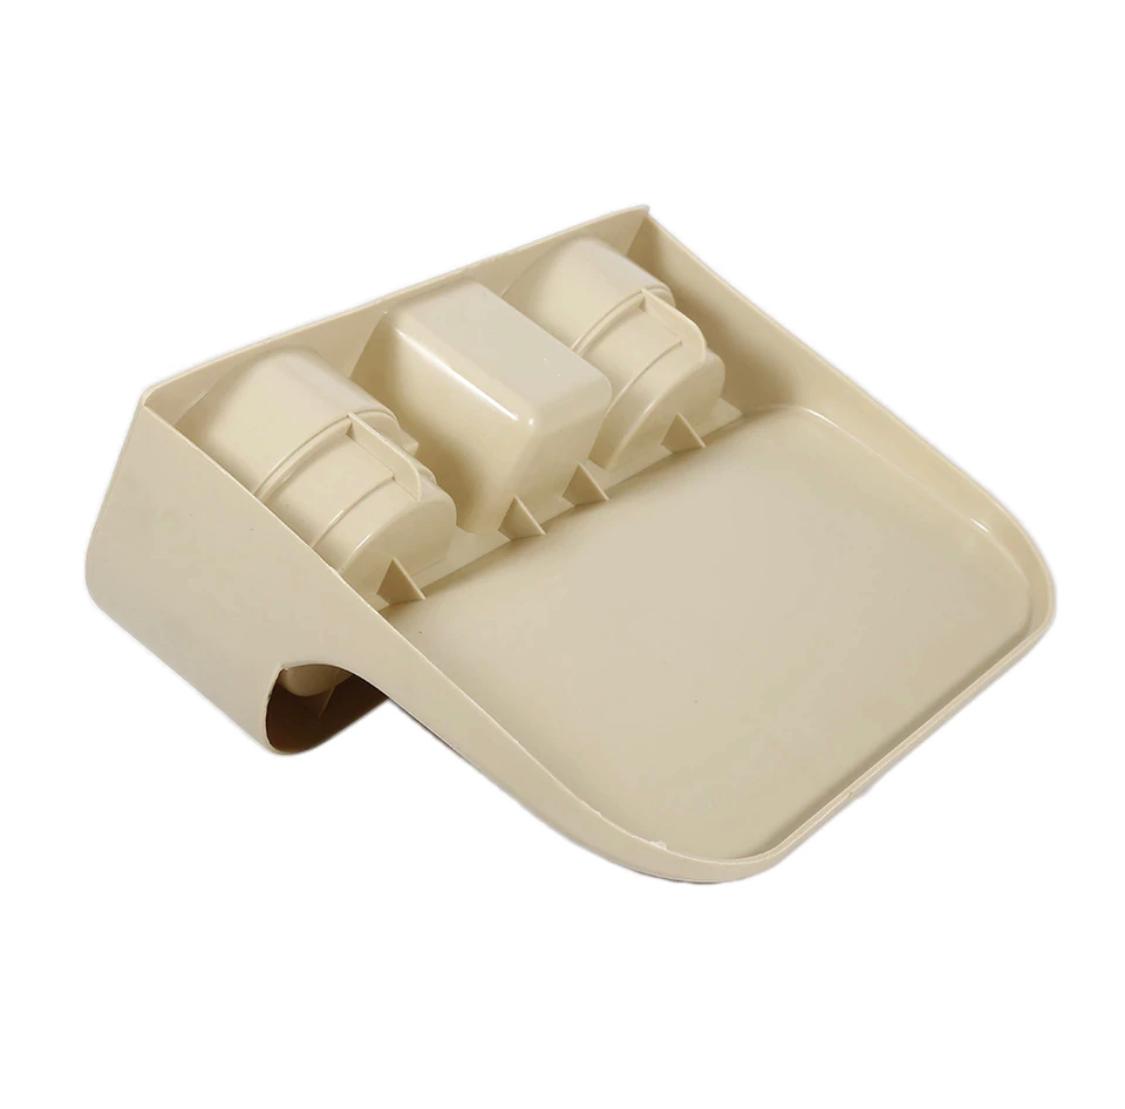 Car Cup Holder Portable Multifunction Vehicle Seat Gap Cup Bottle Phone Drink Holder Stand Boxes Beige